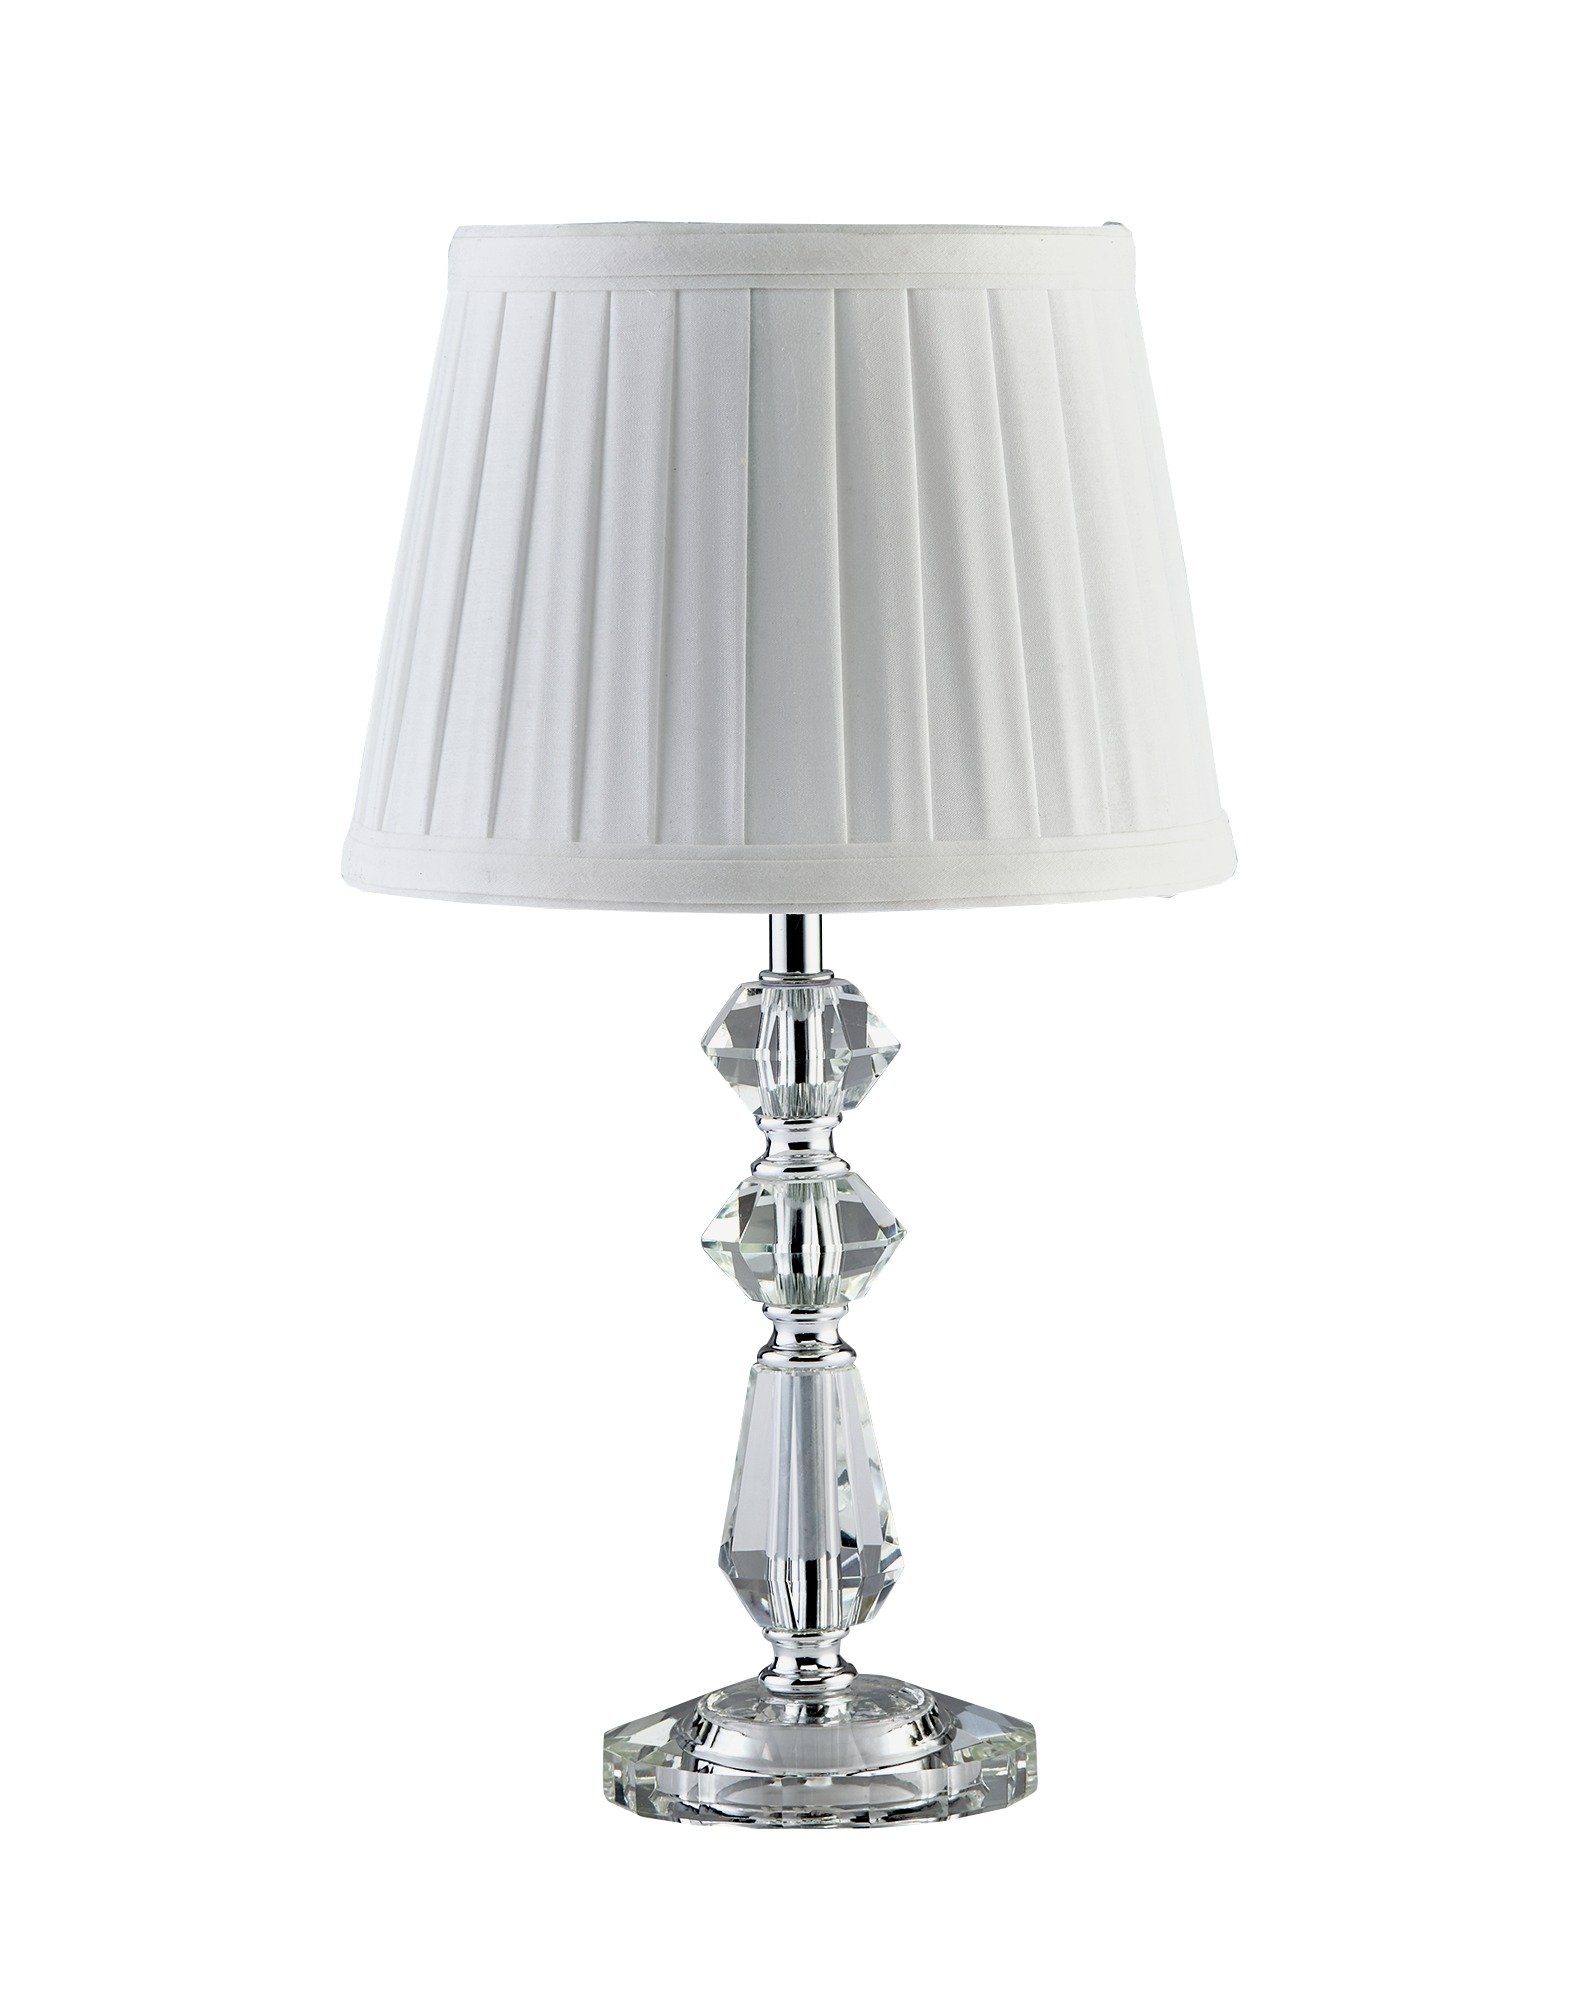 Argos Home Kilmore Glass Table Lamp with Pleated Shade